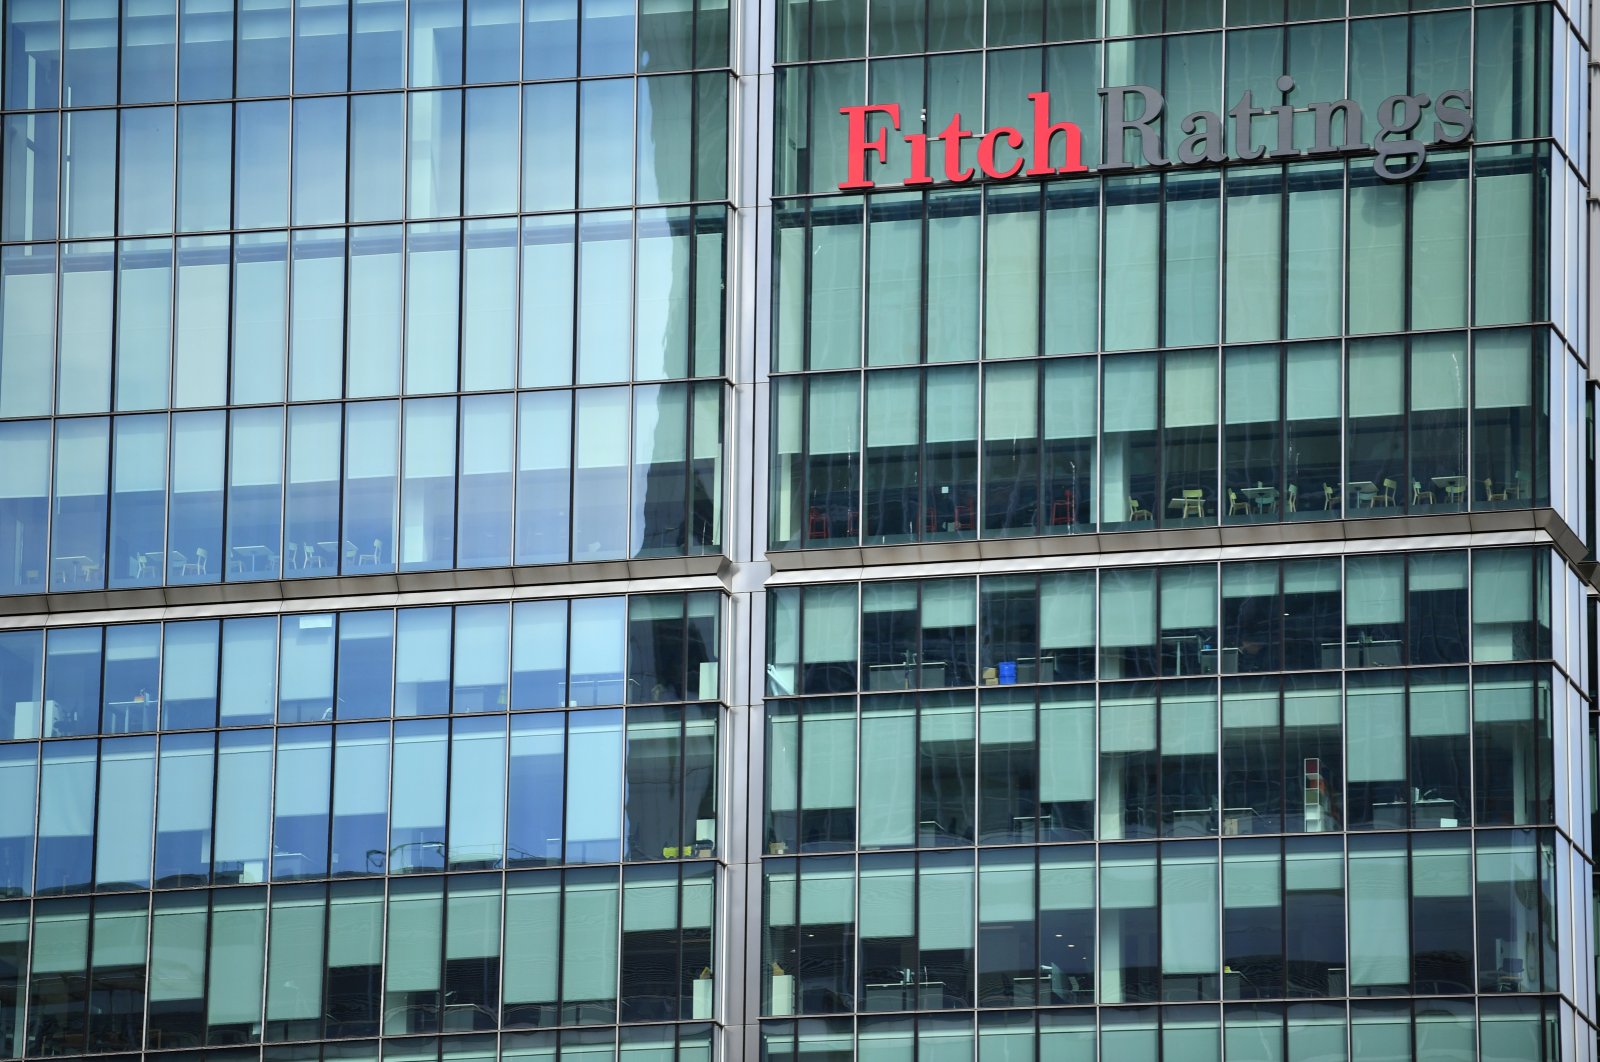 The offices of the Fitch Ratings building appear empty in Canary Wharf, London, Britain, May 27, 2020. (Reuters Photo)